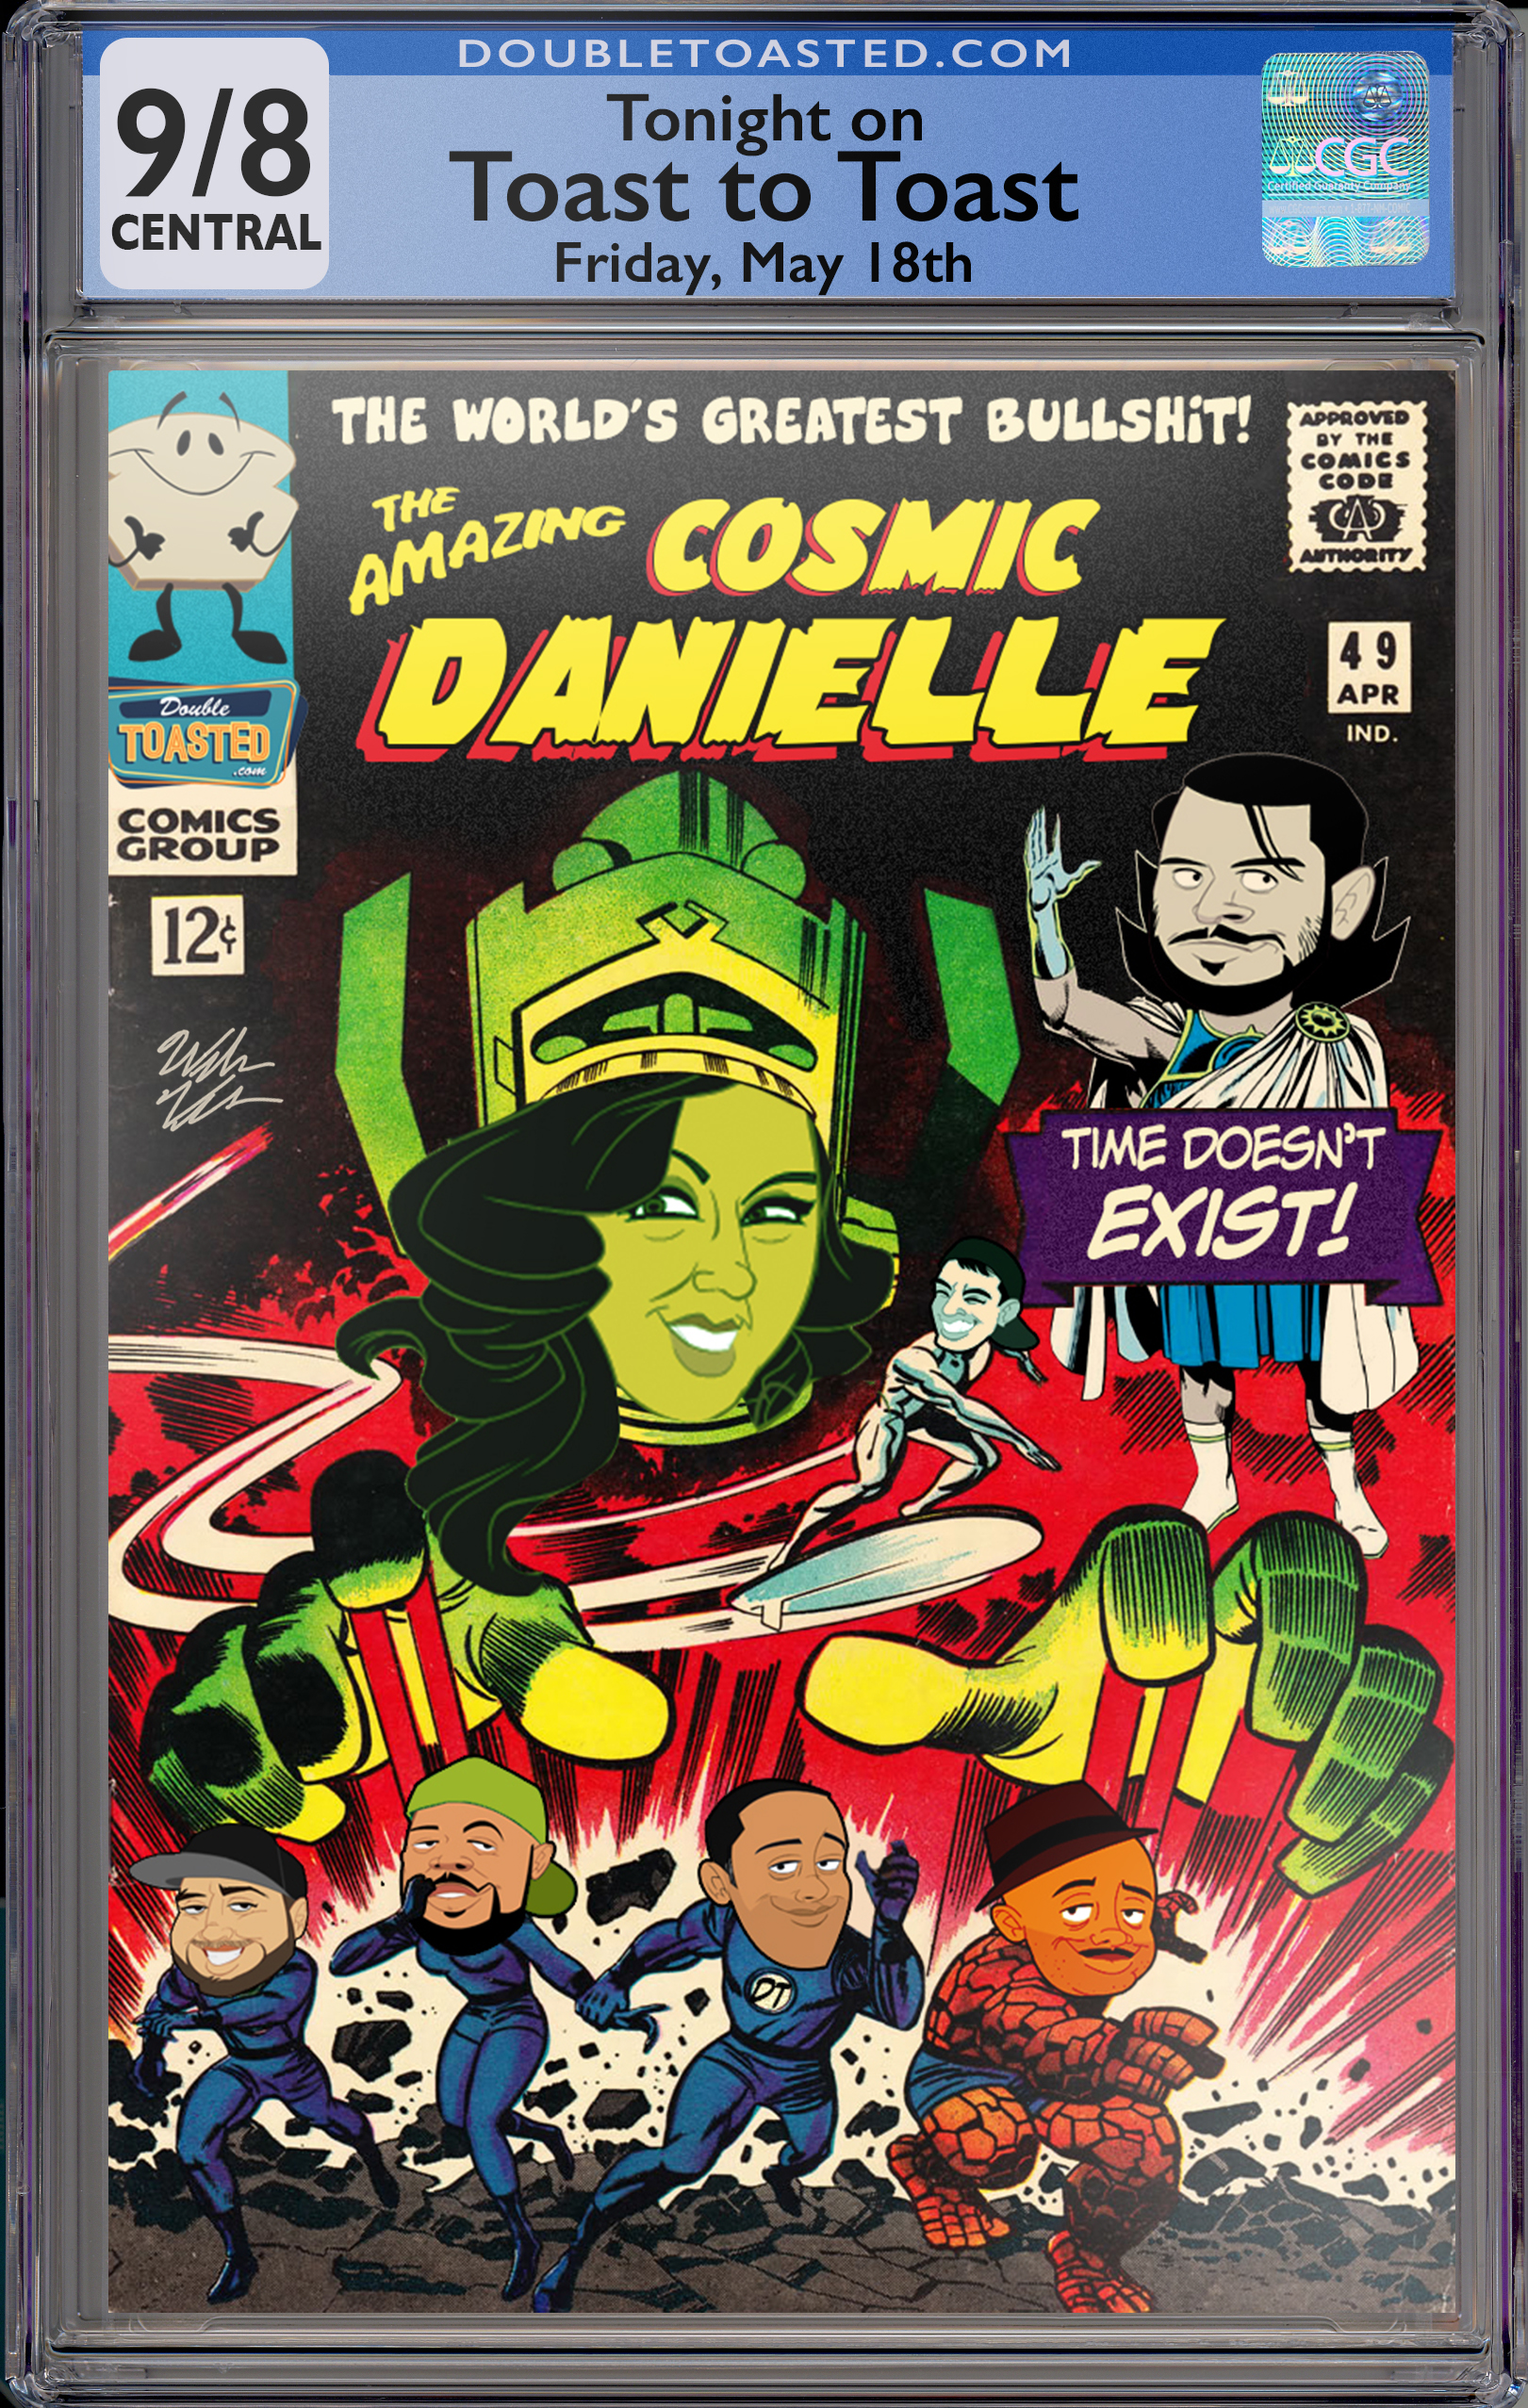 Cosmic danielle double toasted